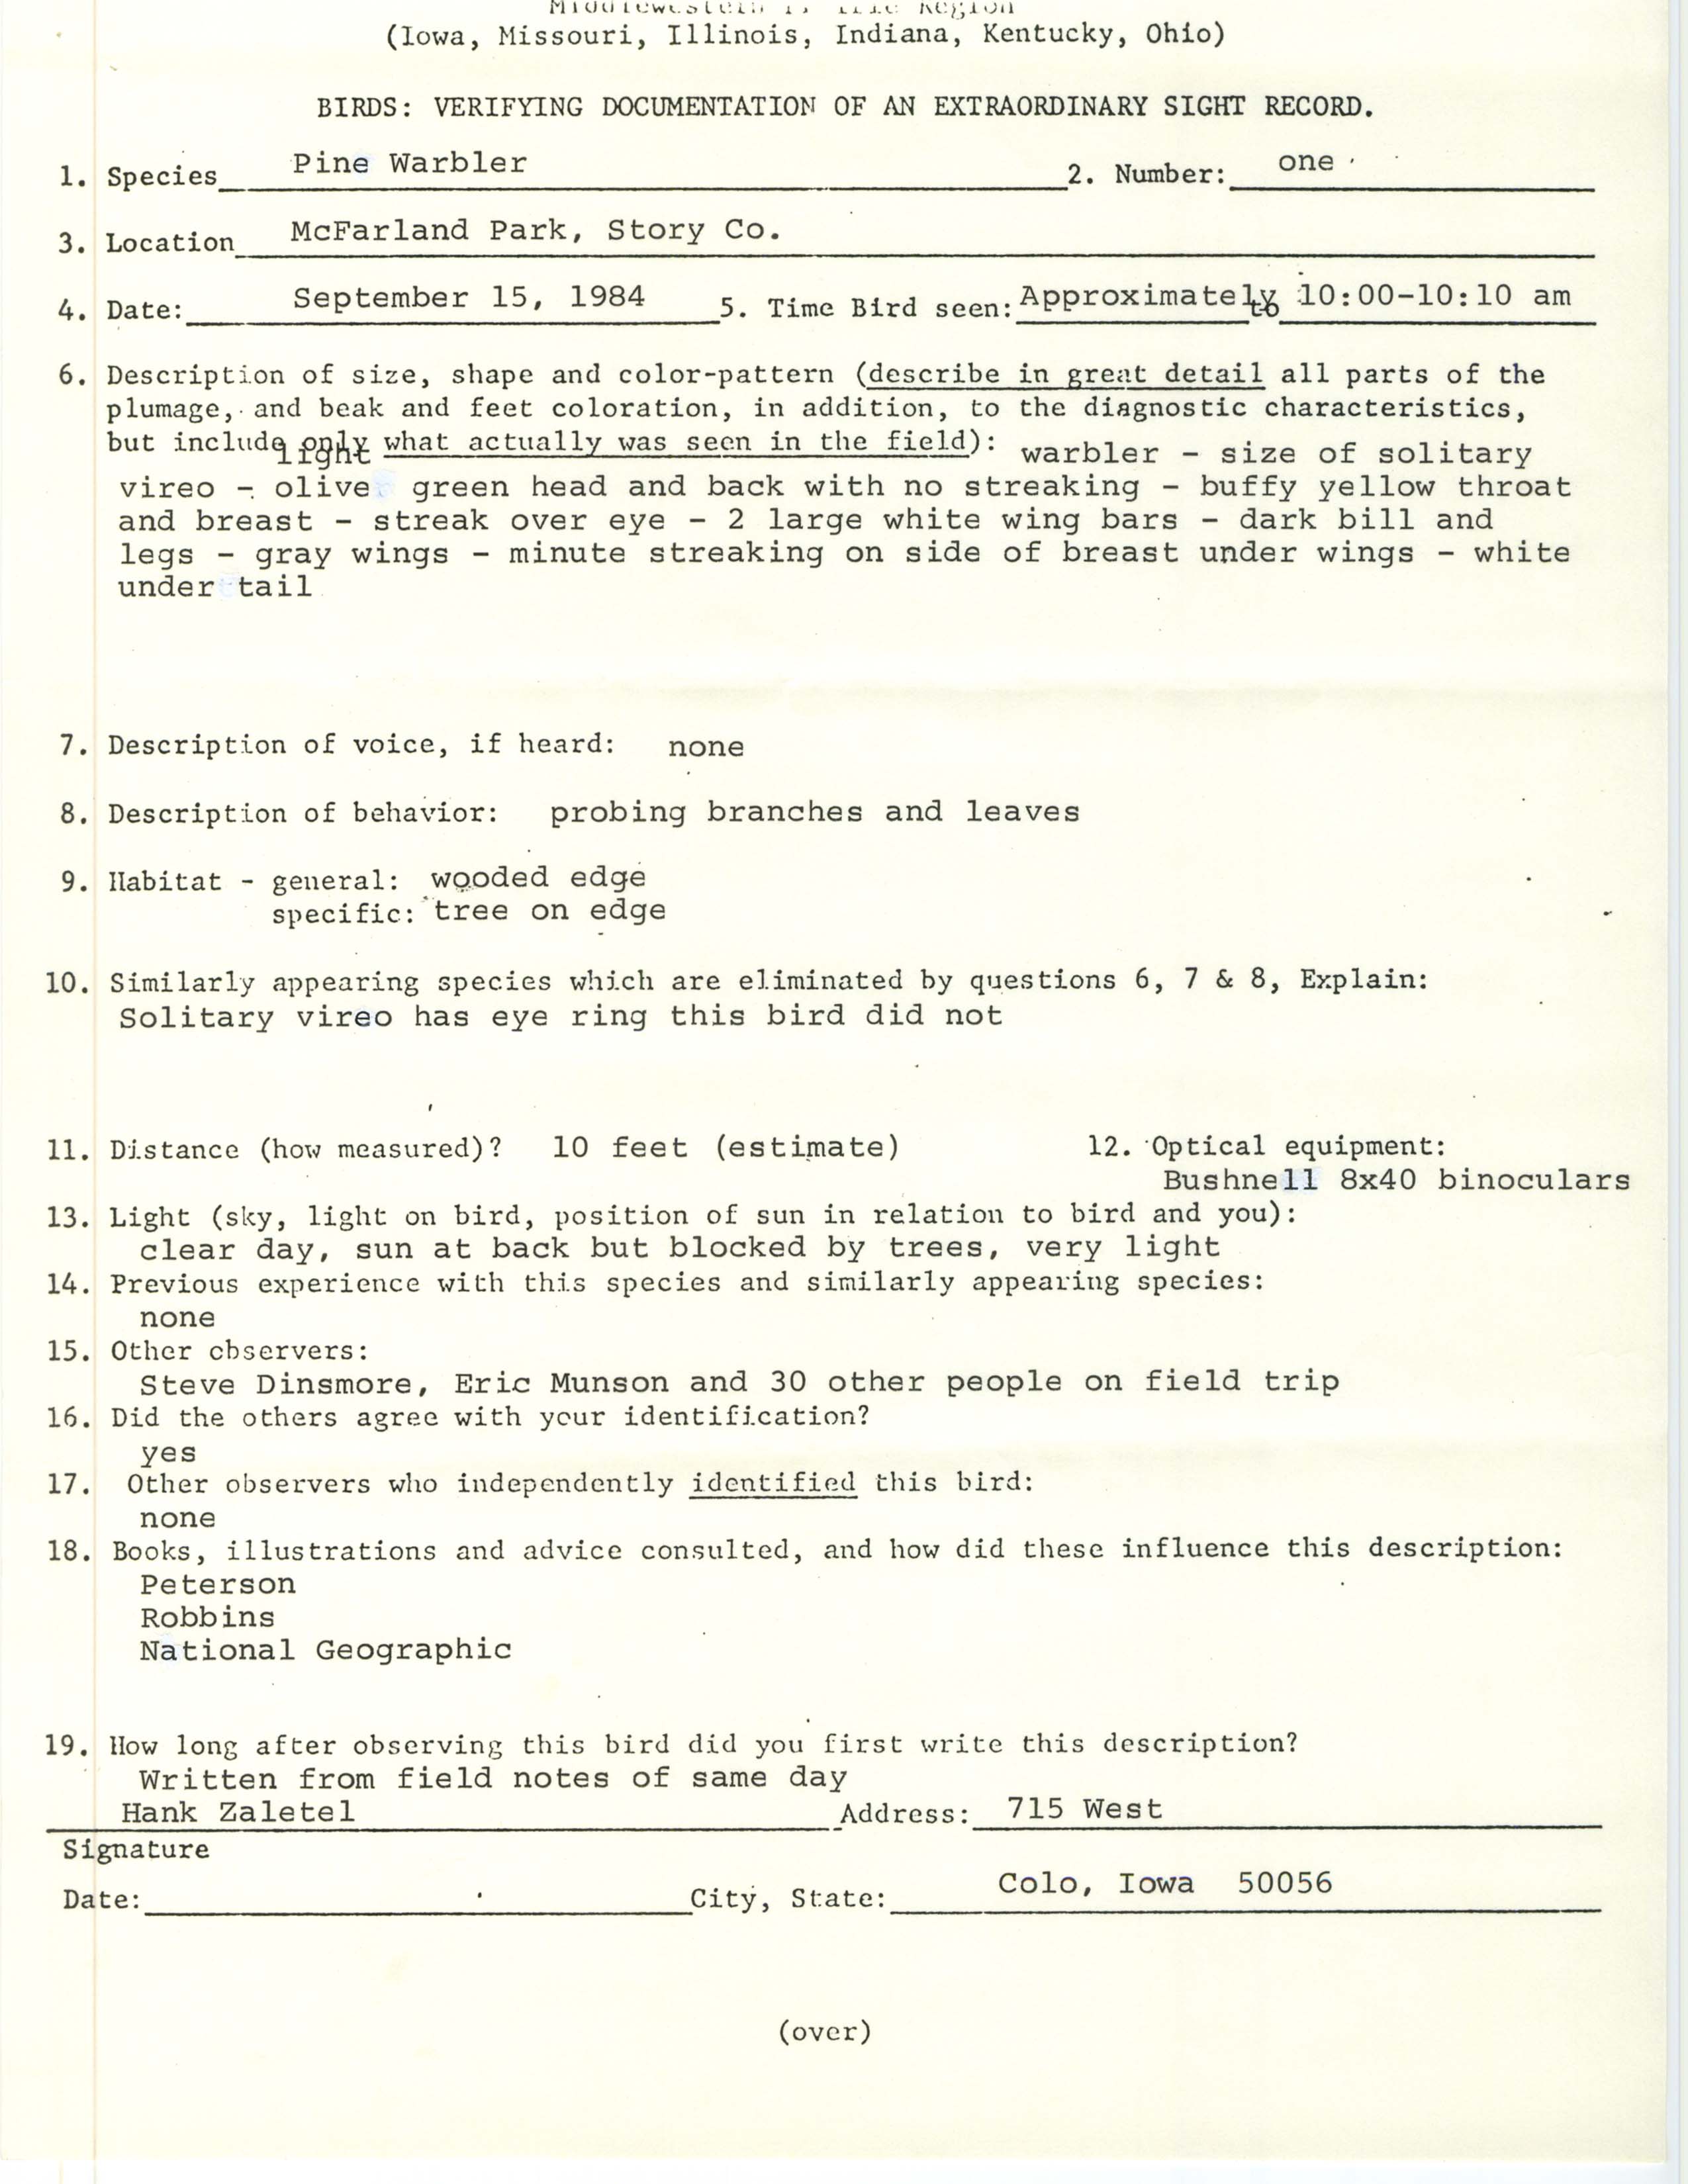 Rare bird documentation form for Pine Warbler at McFarland Lake Park in Story County, 1984